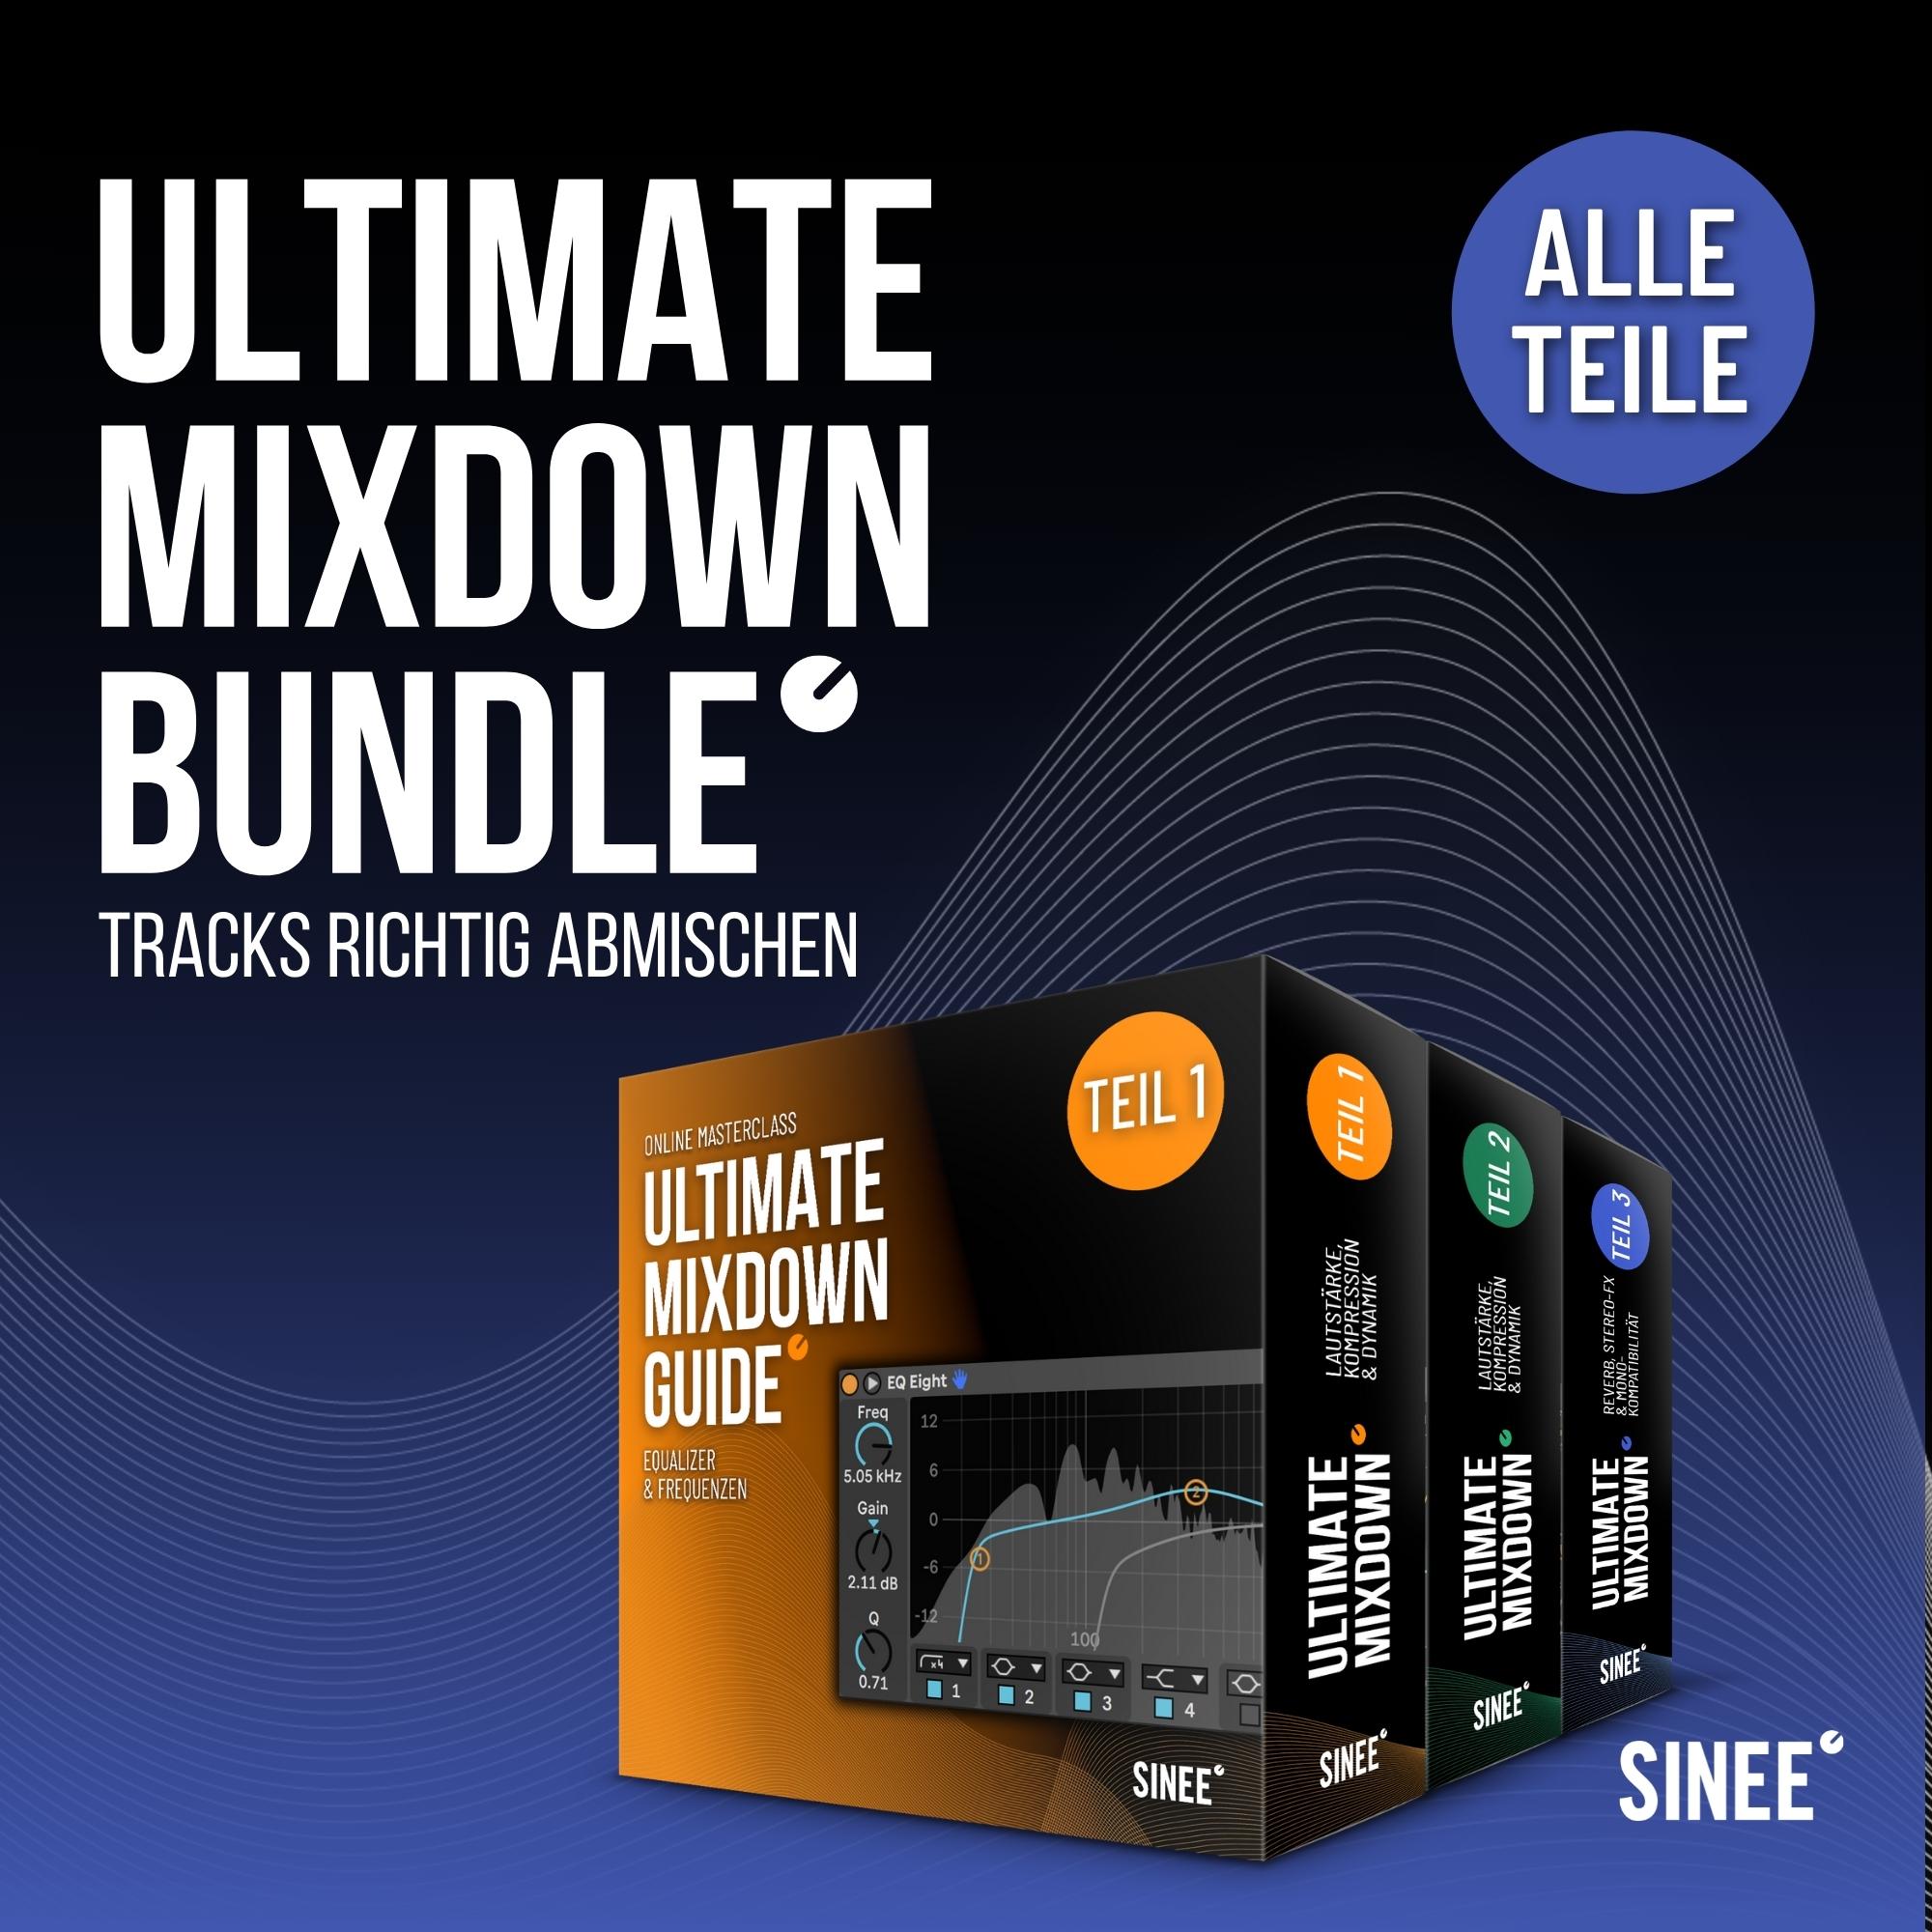 Ultimate Mixdown Guide Bundle - Equalizer, Dynamics & Stereo FX